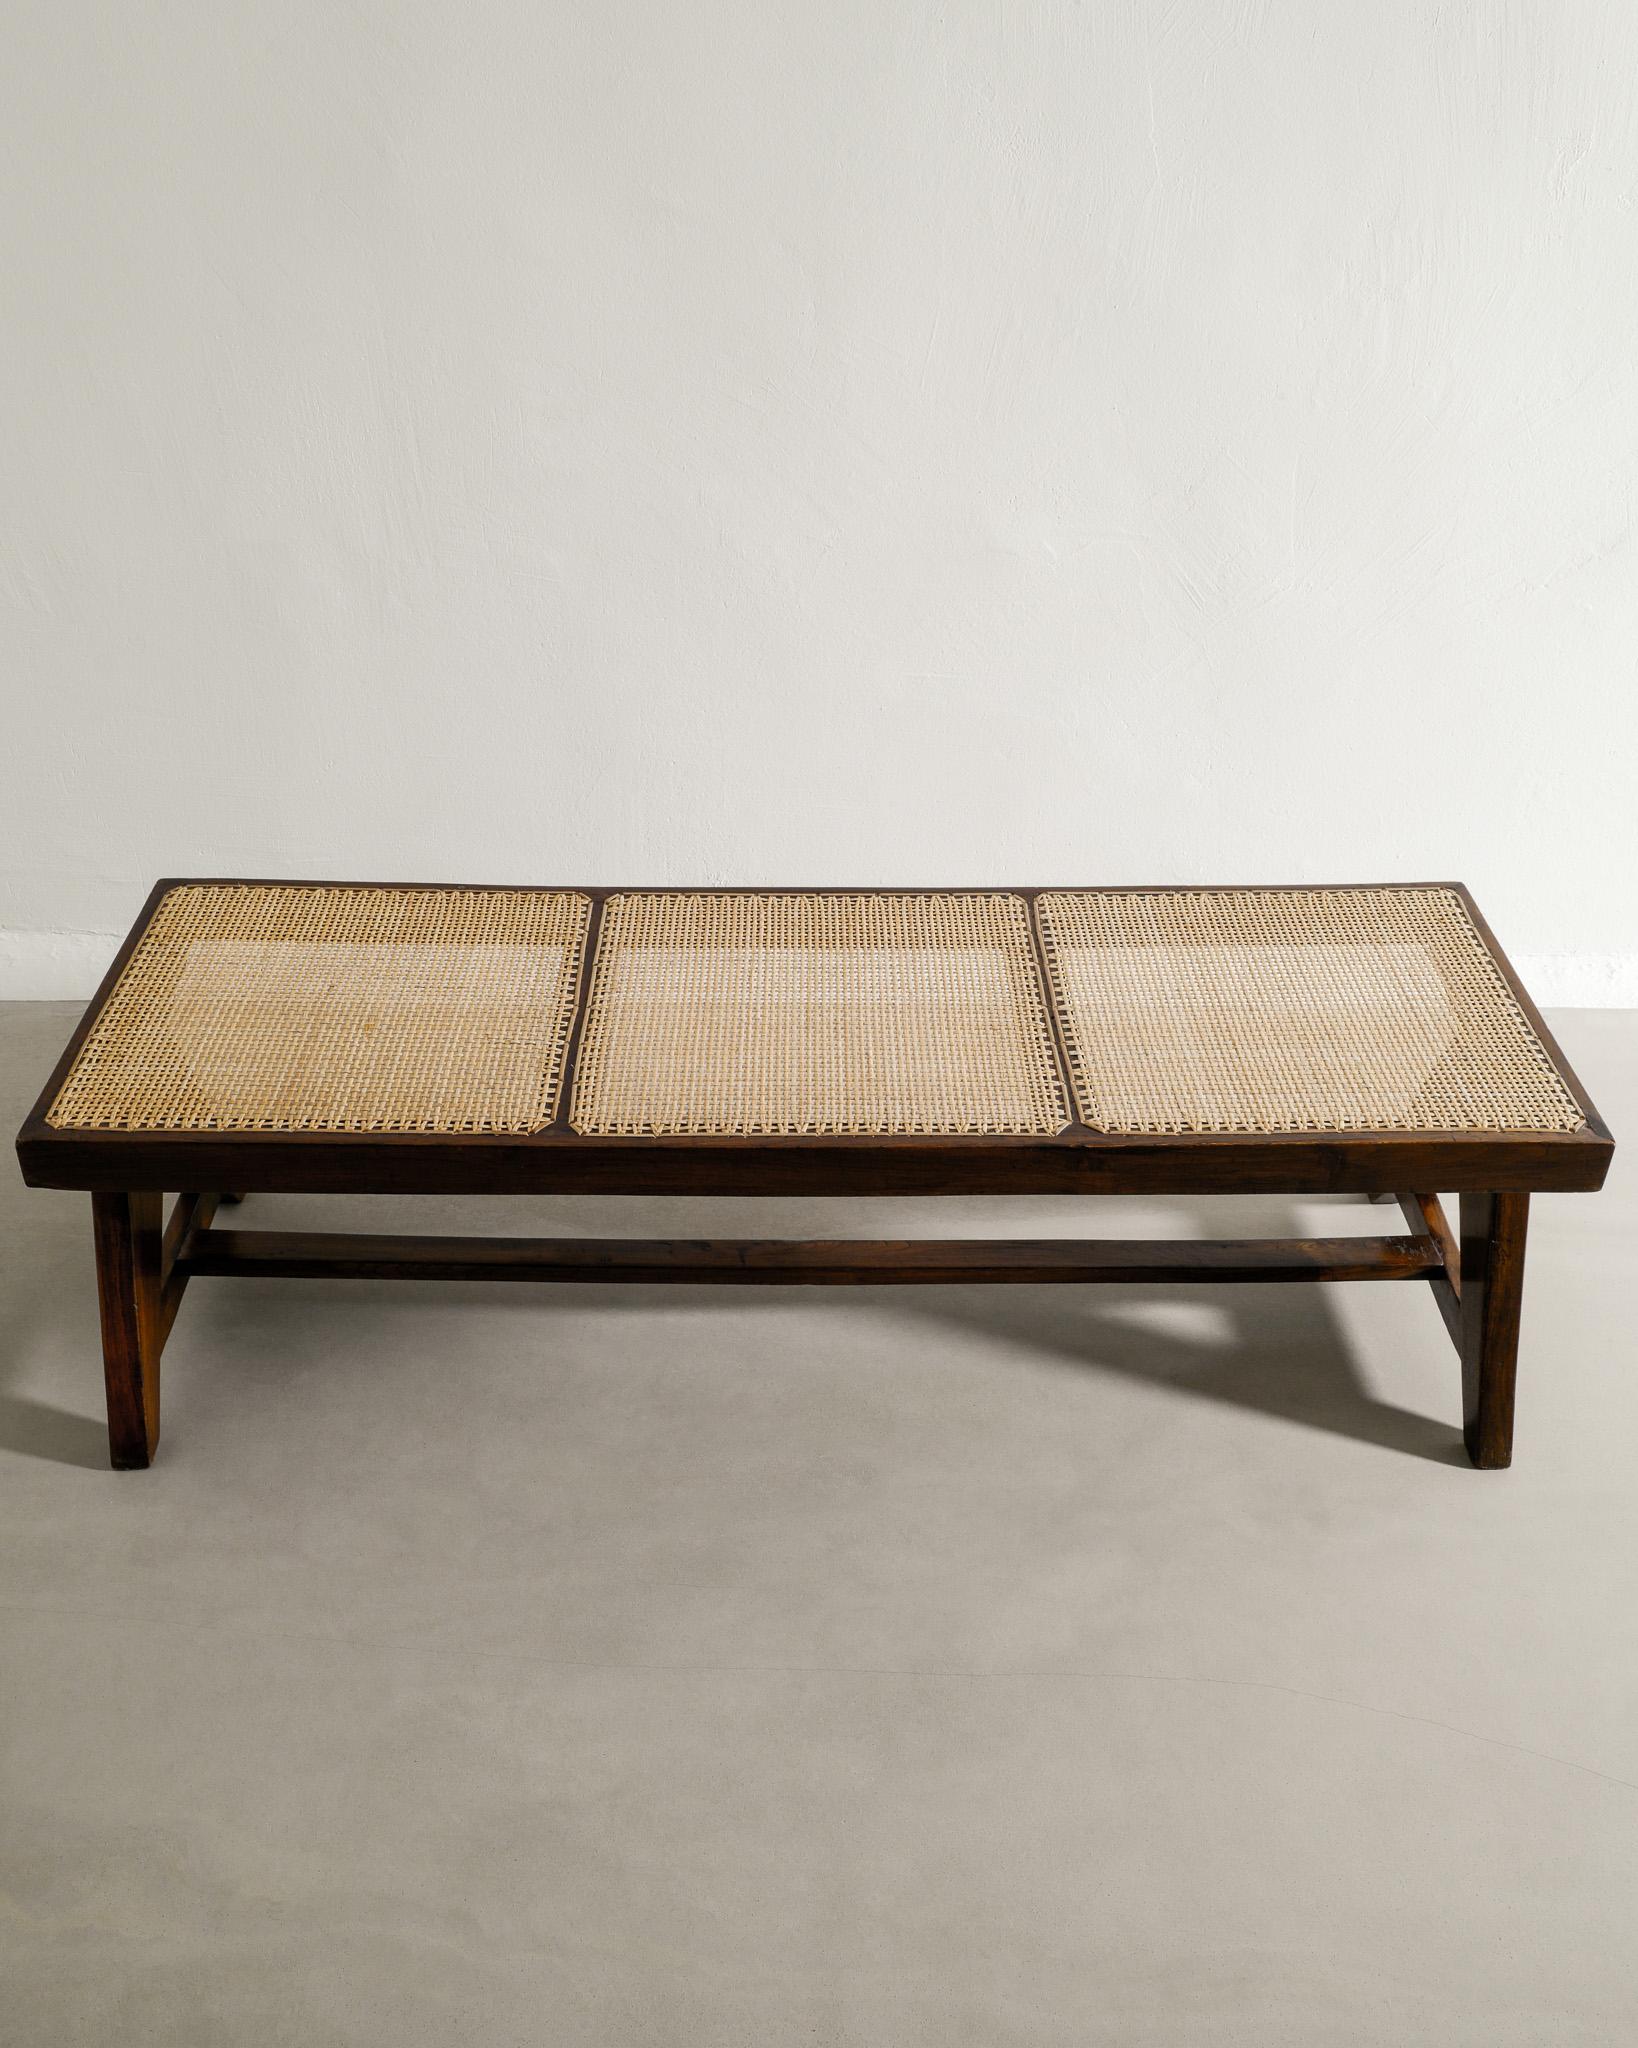 Mid Century Wooden Teak & Rattan Bench by Pierre Jeanneret for Chandigarh, 1950s For Sale 1